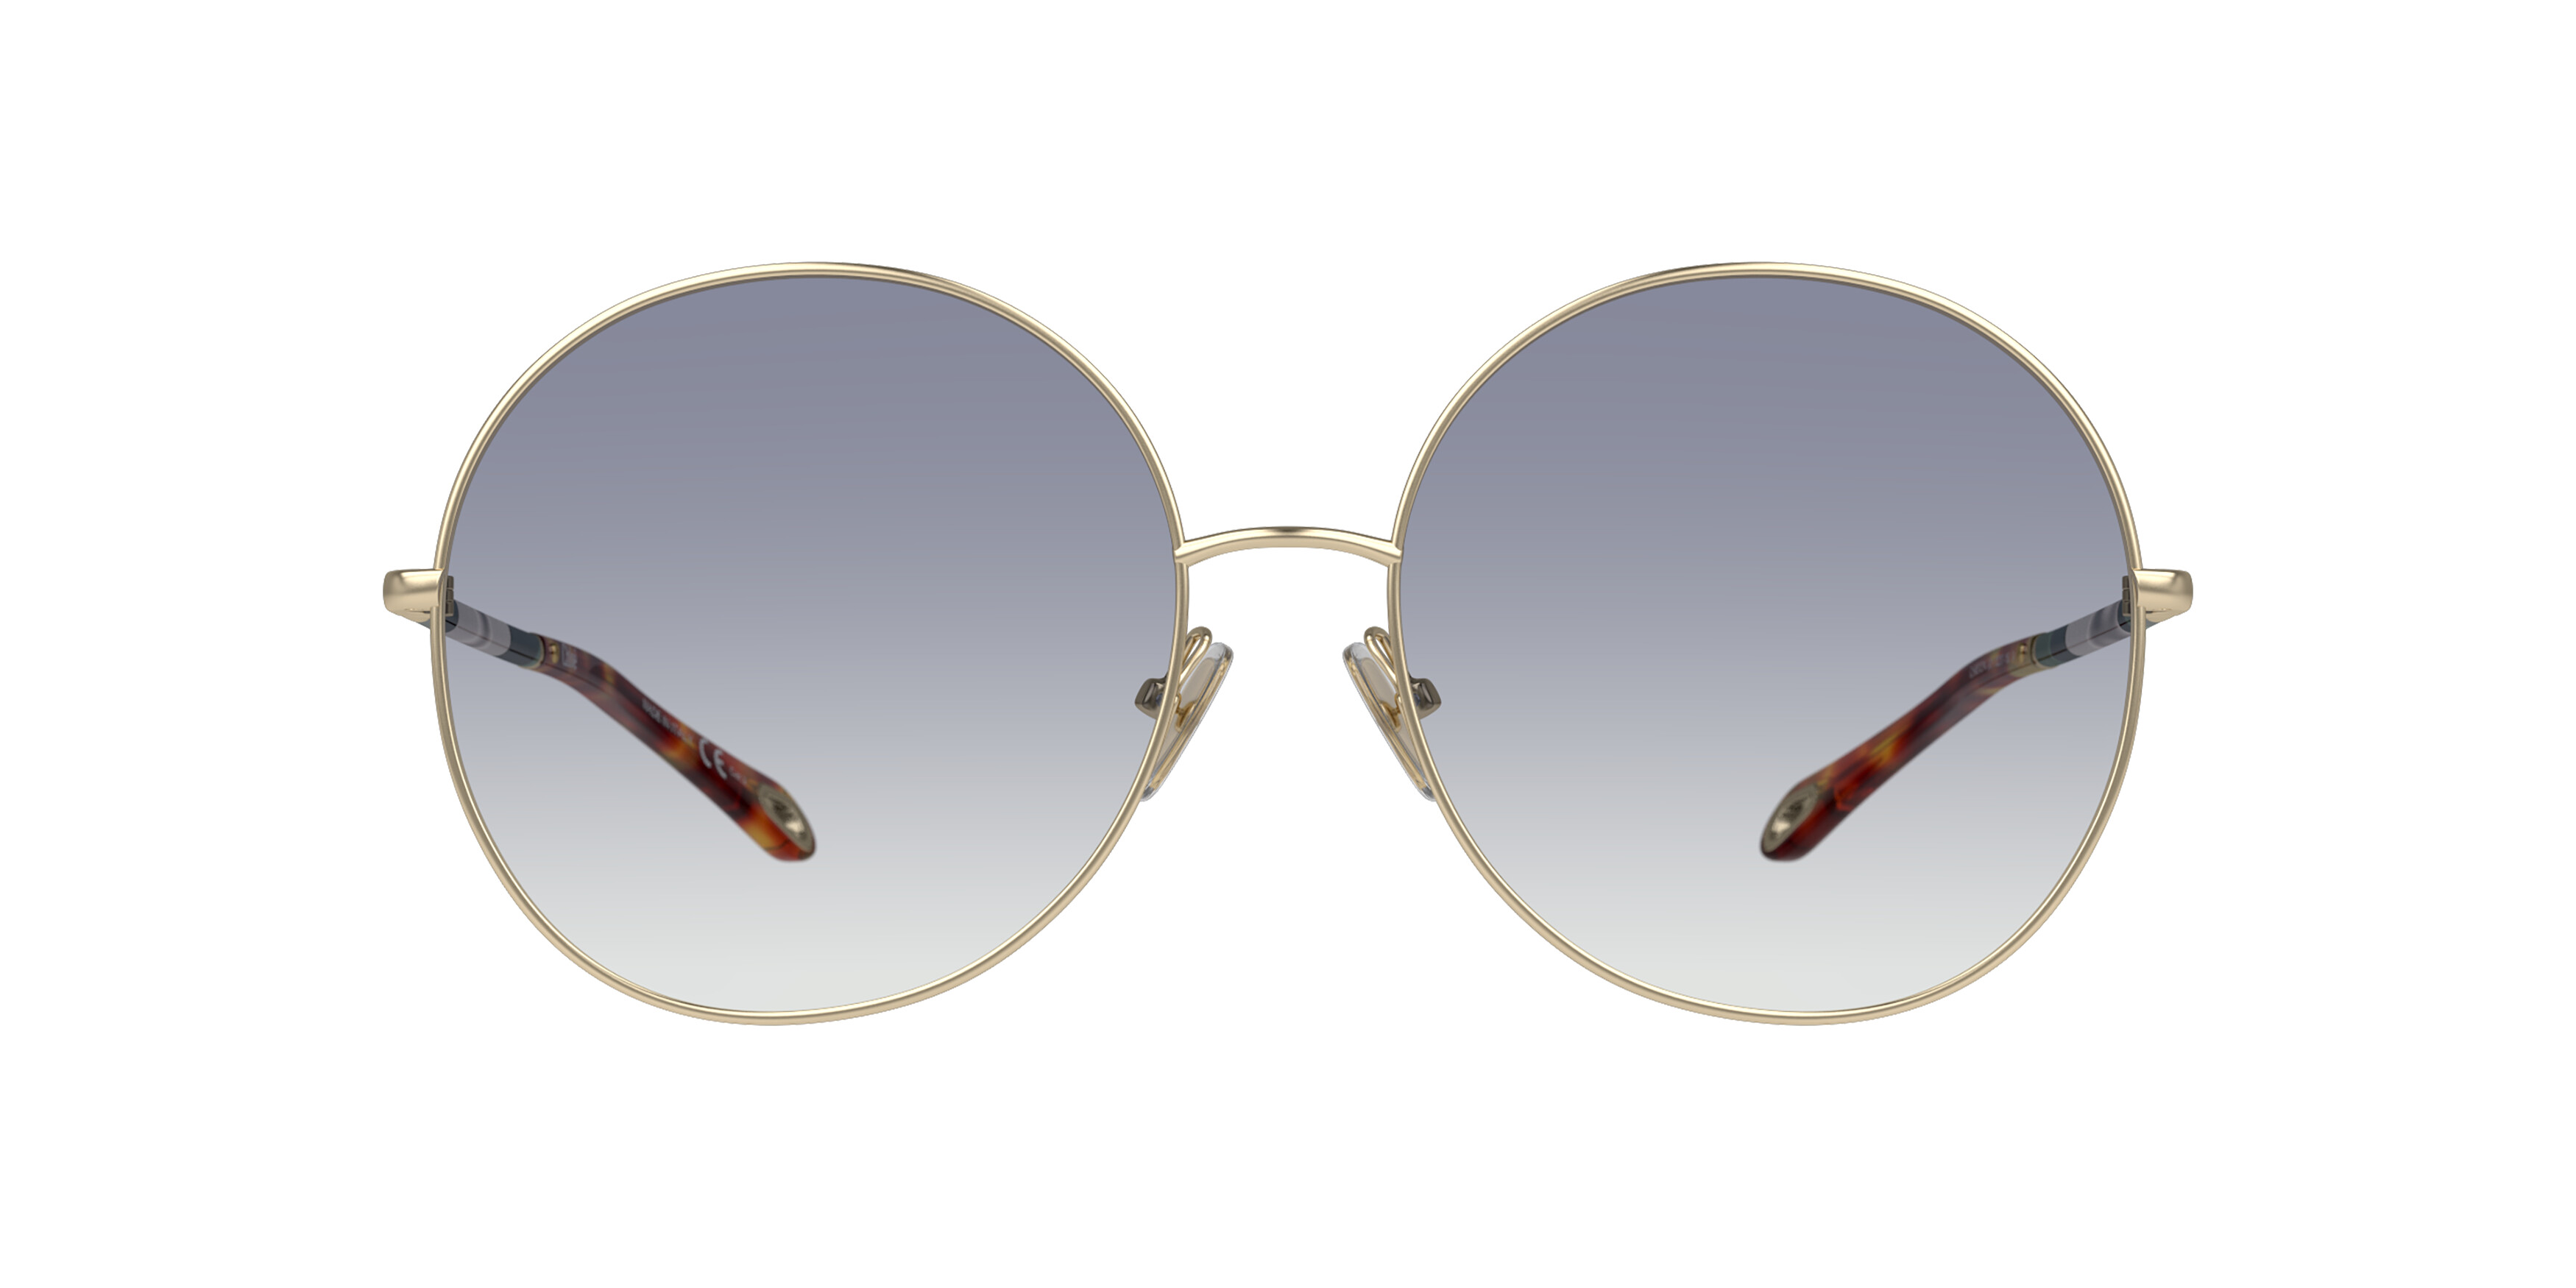 [products.image.front] Chloe CH0112S 001 Sonnenbrille